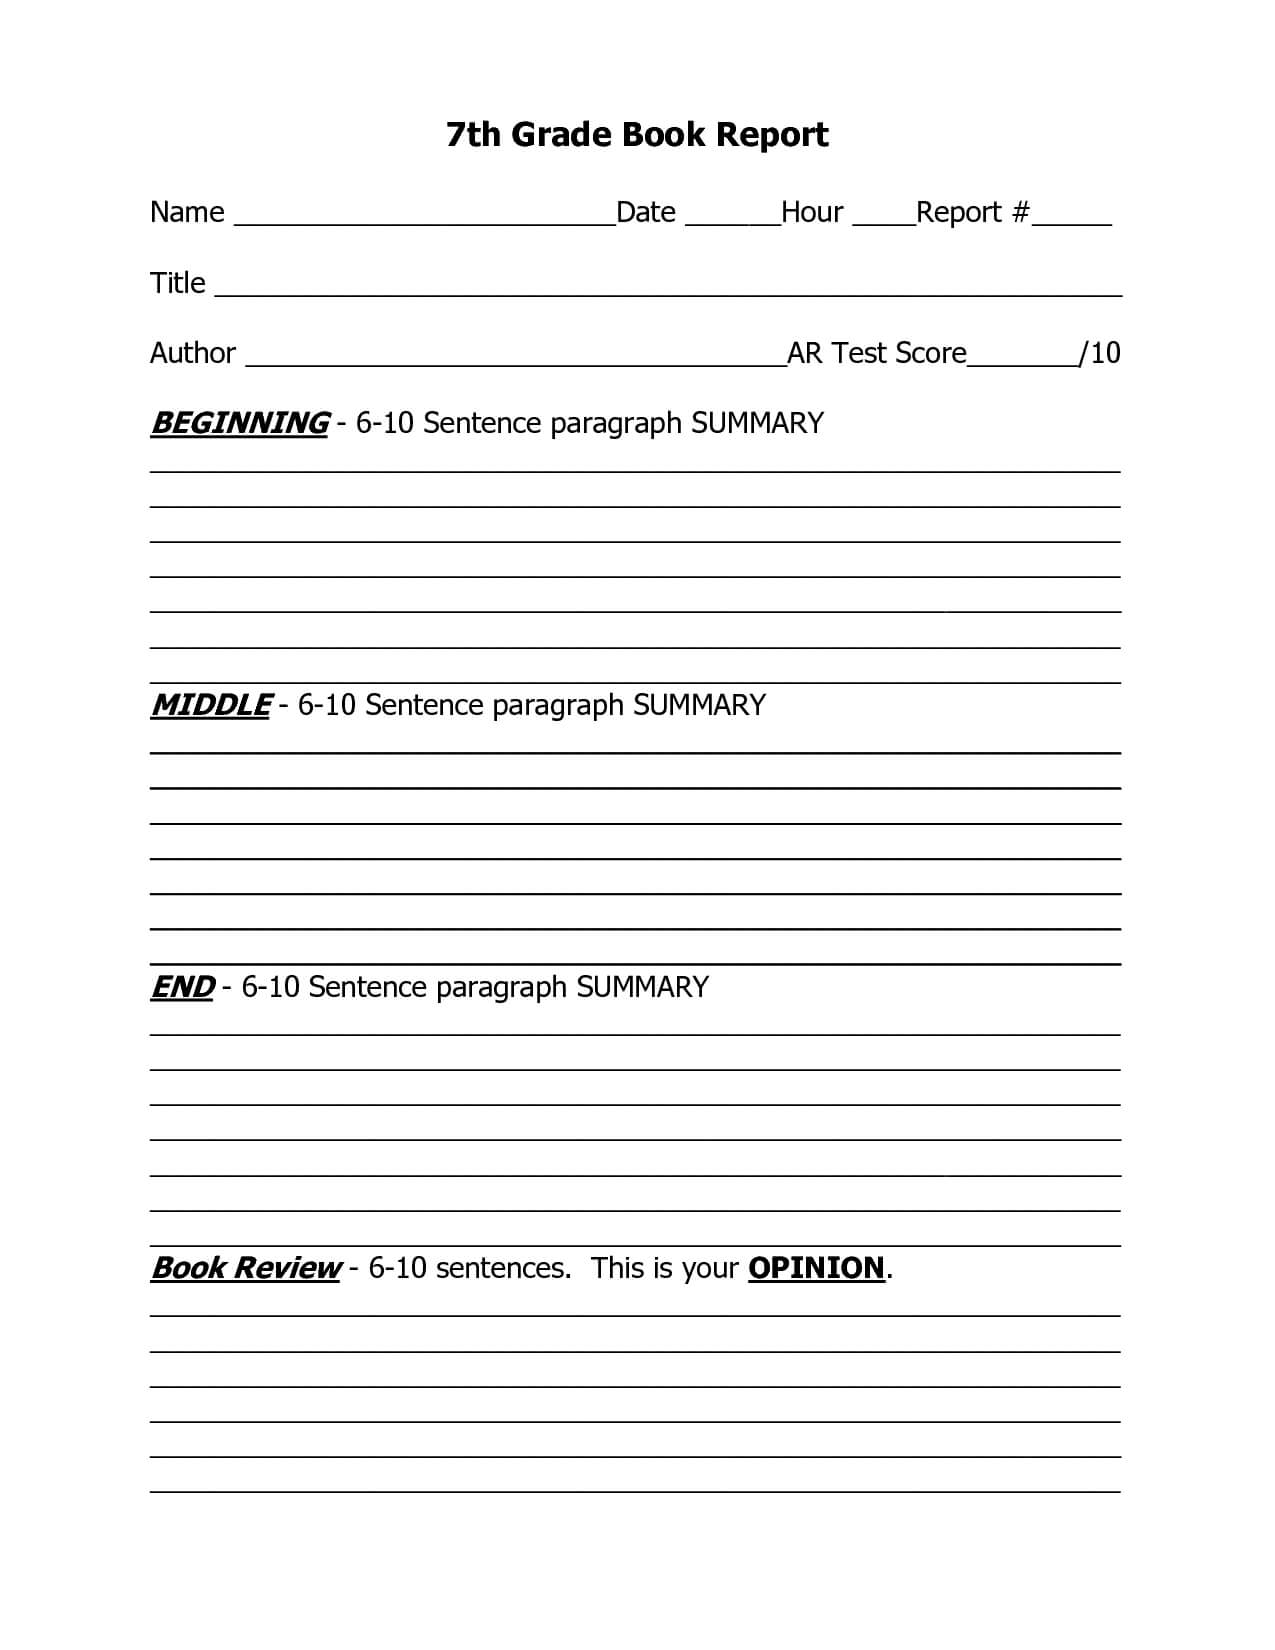 7Th Grade Book Report Outline Template | Book Report With Regard To Middle School Book Report Template